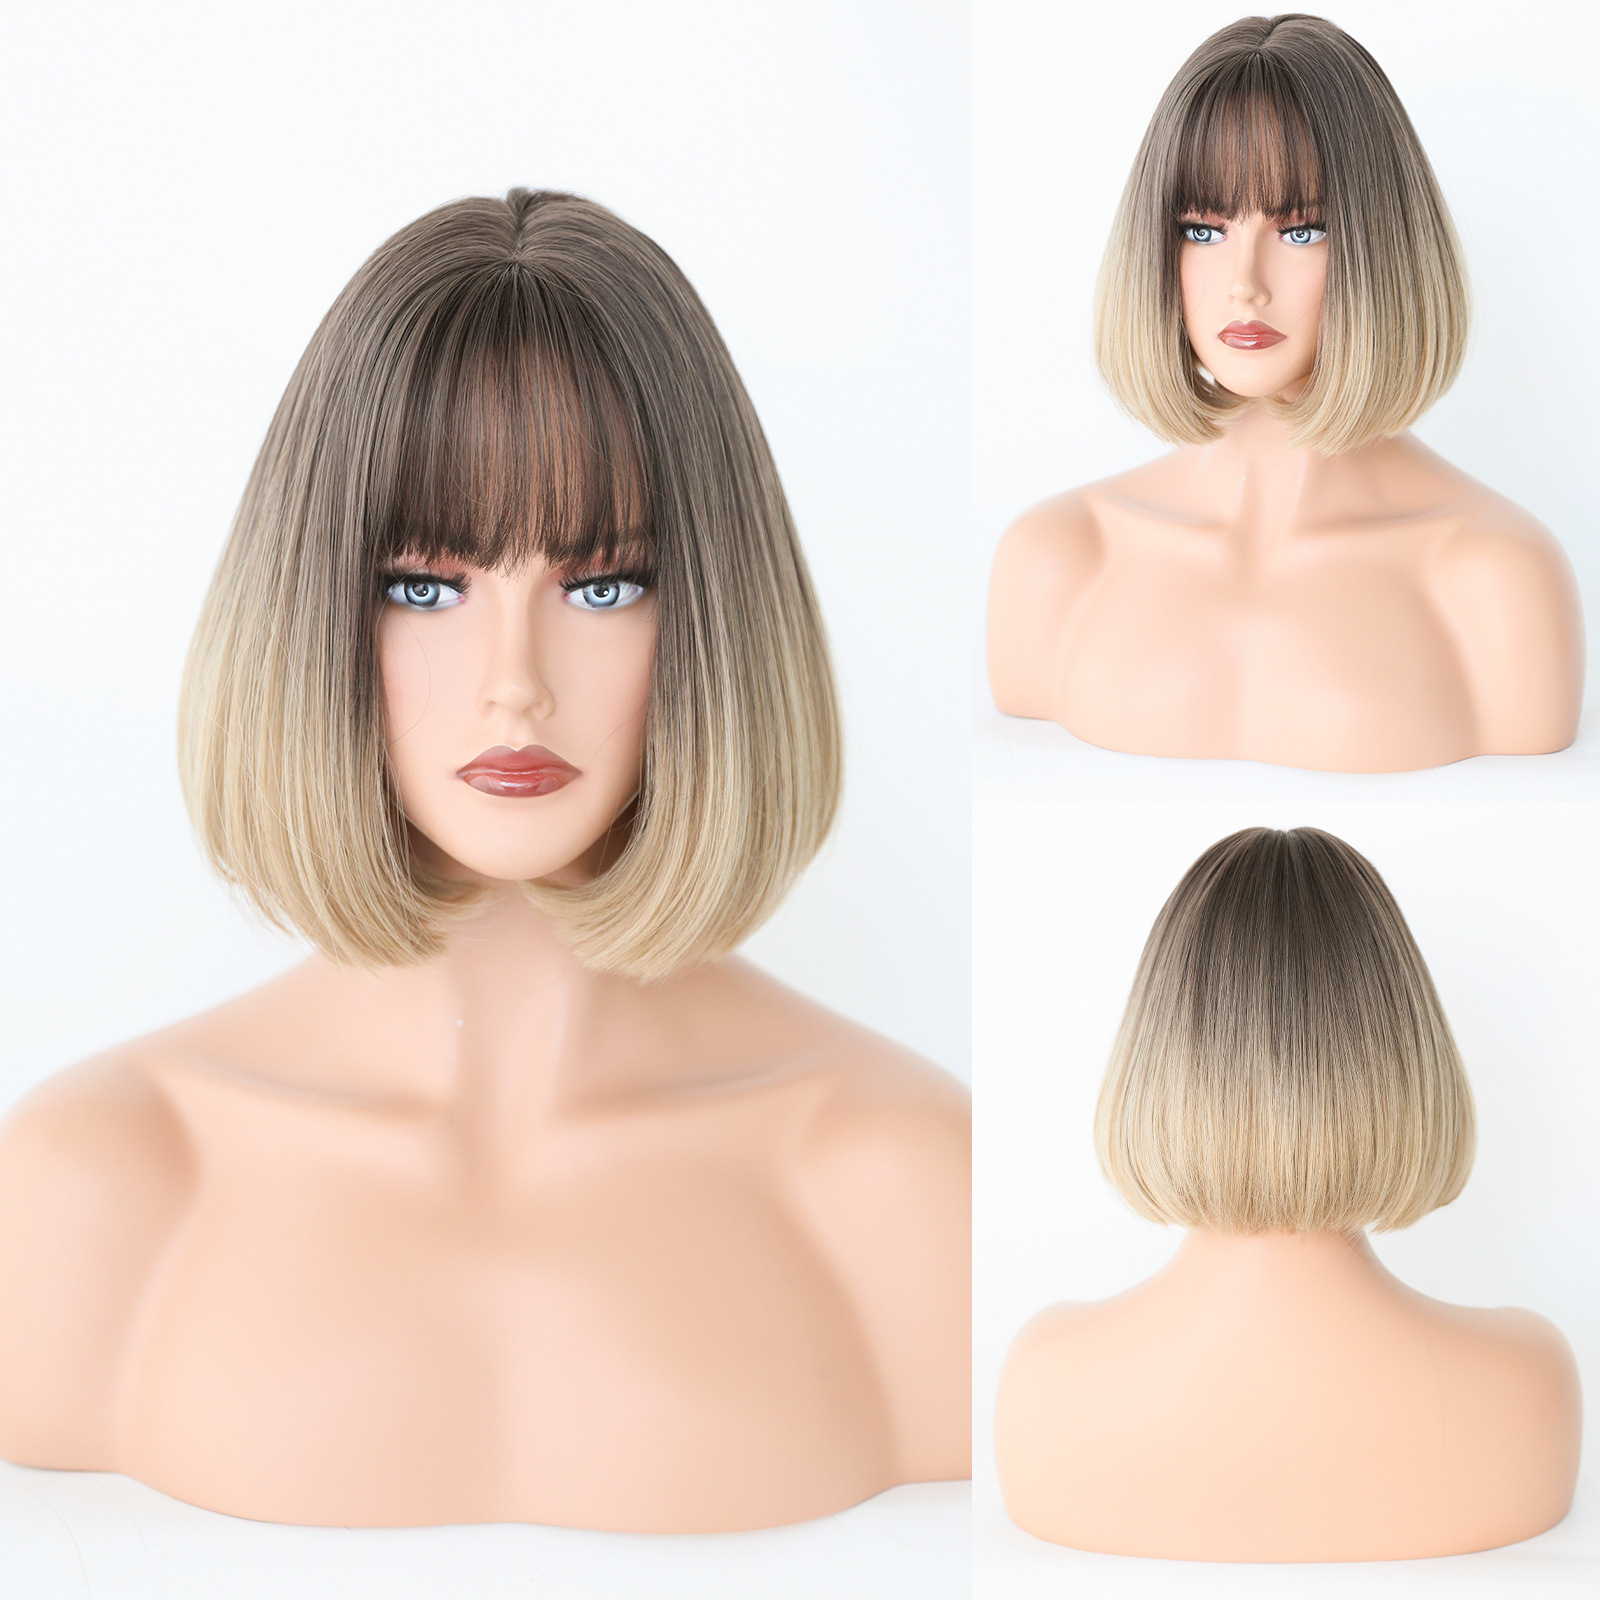 A fashionable female wig with short hair in a BOB head style, made from synthetic material with a gradient color and bangs, designed for easy styling.